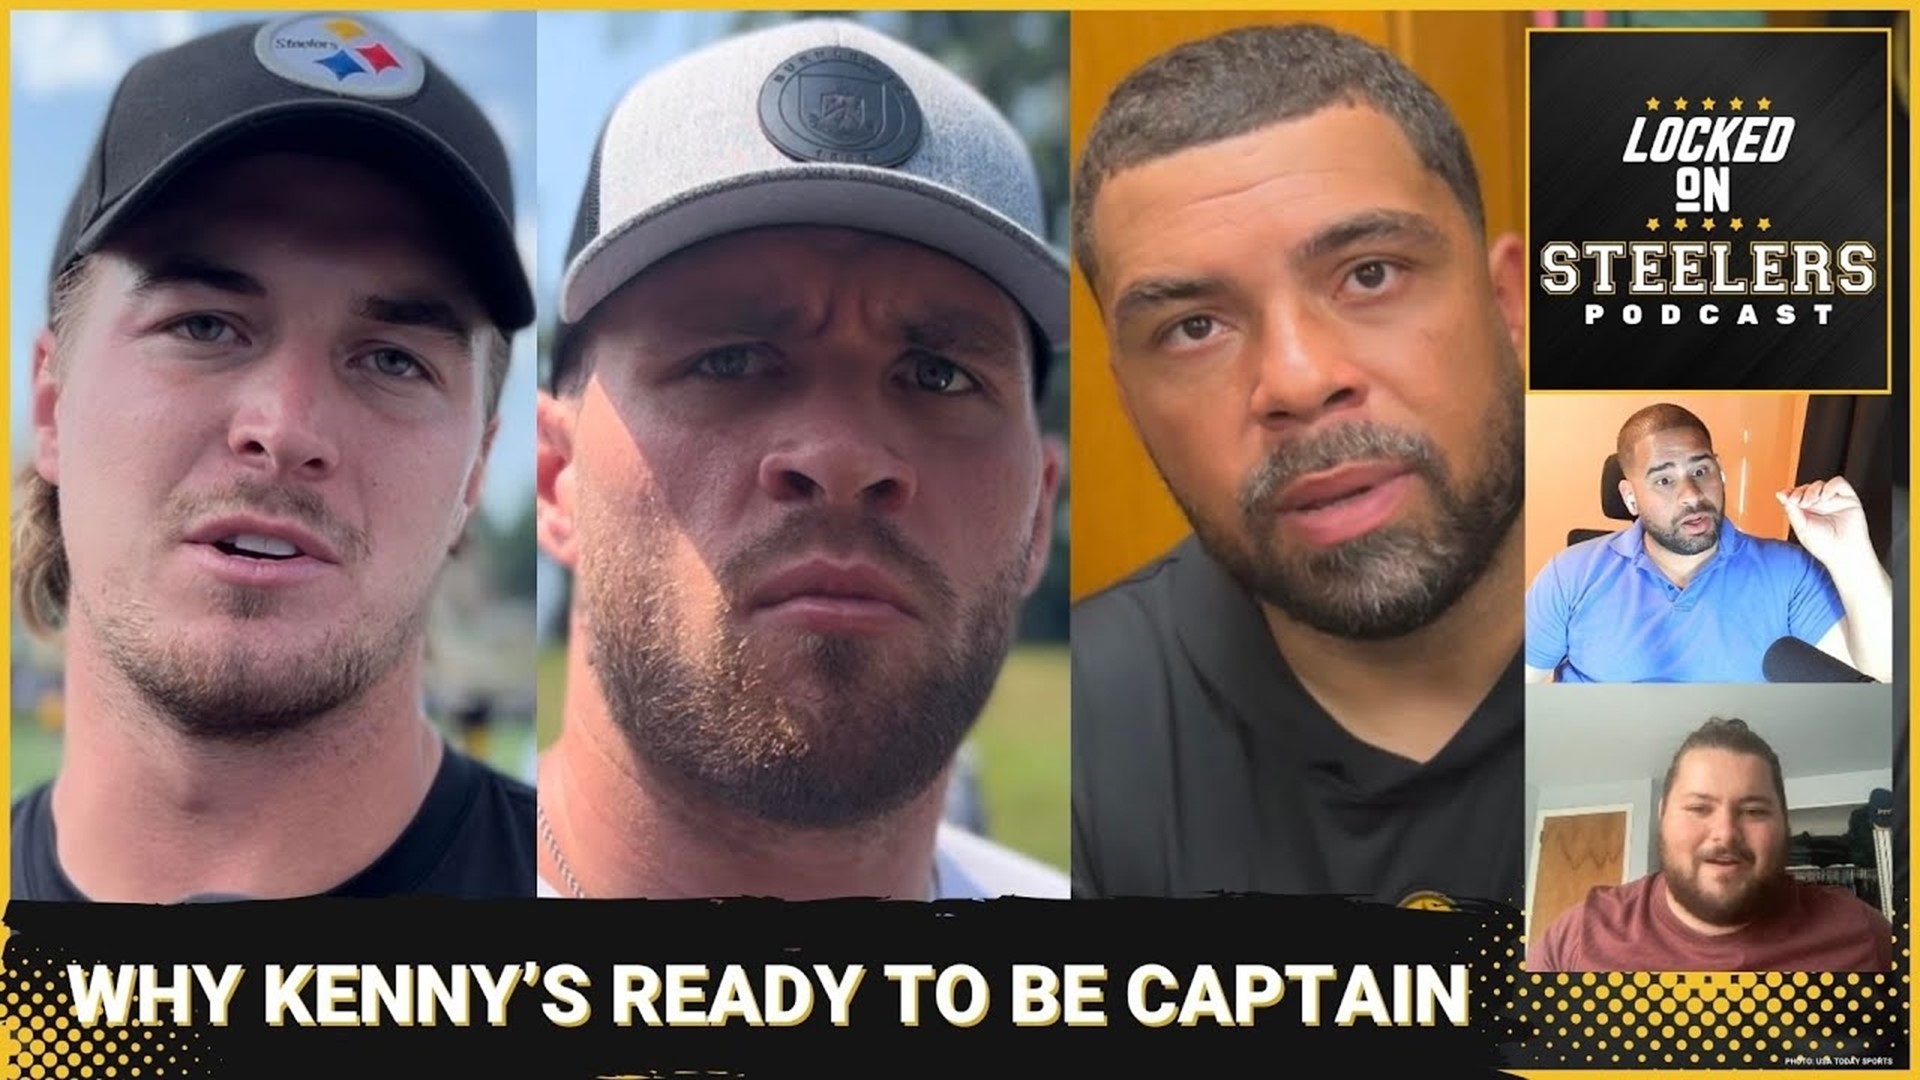 The Pittsburgh Steelers' players voted Kenny Pickett to join T.J. Watt and Cam Heyward one of the teams' captains.